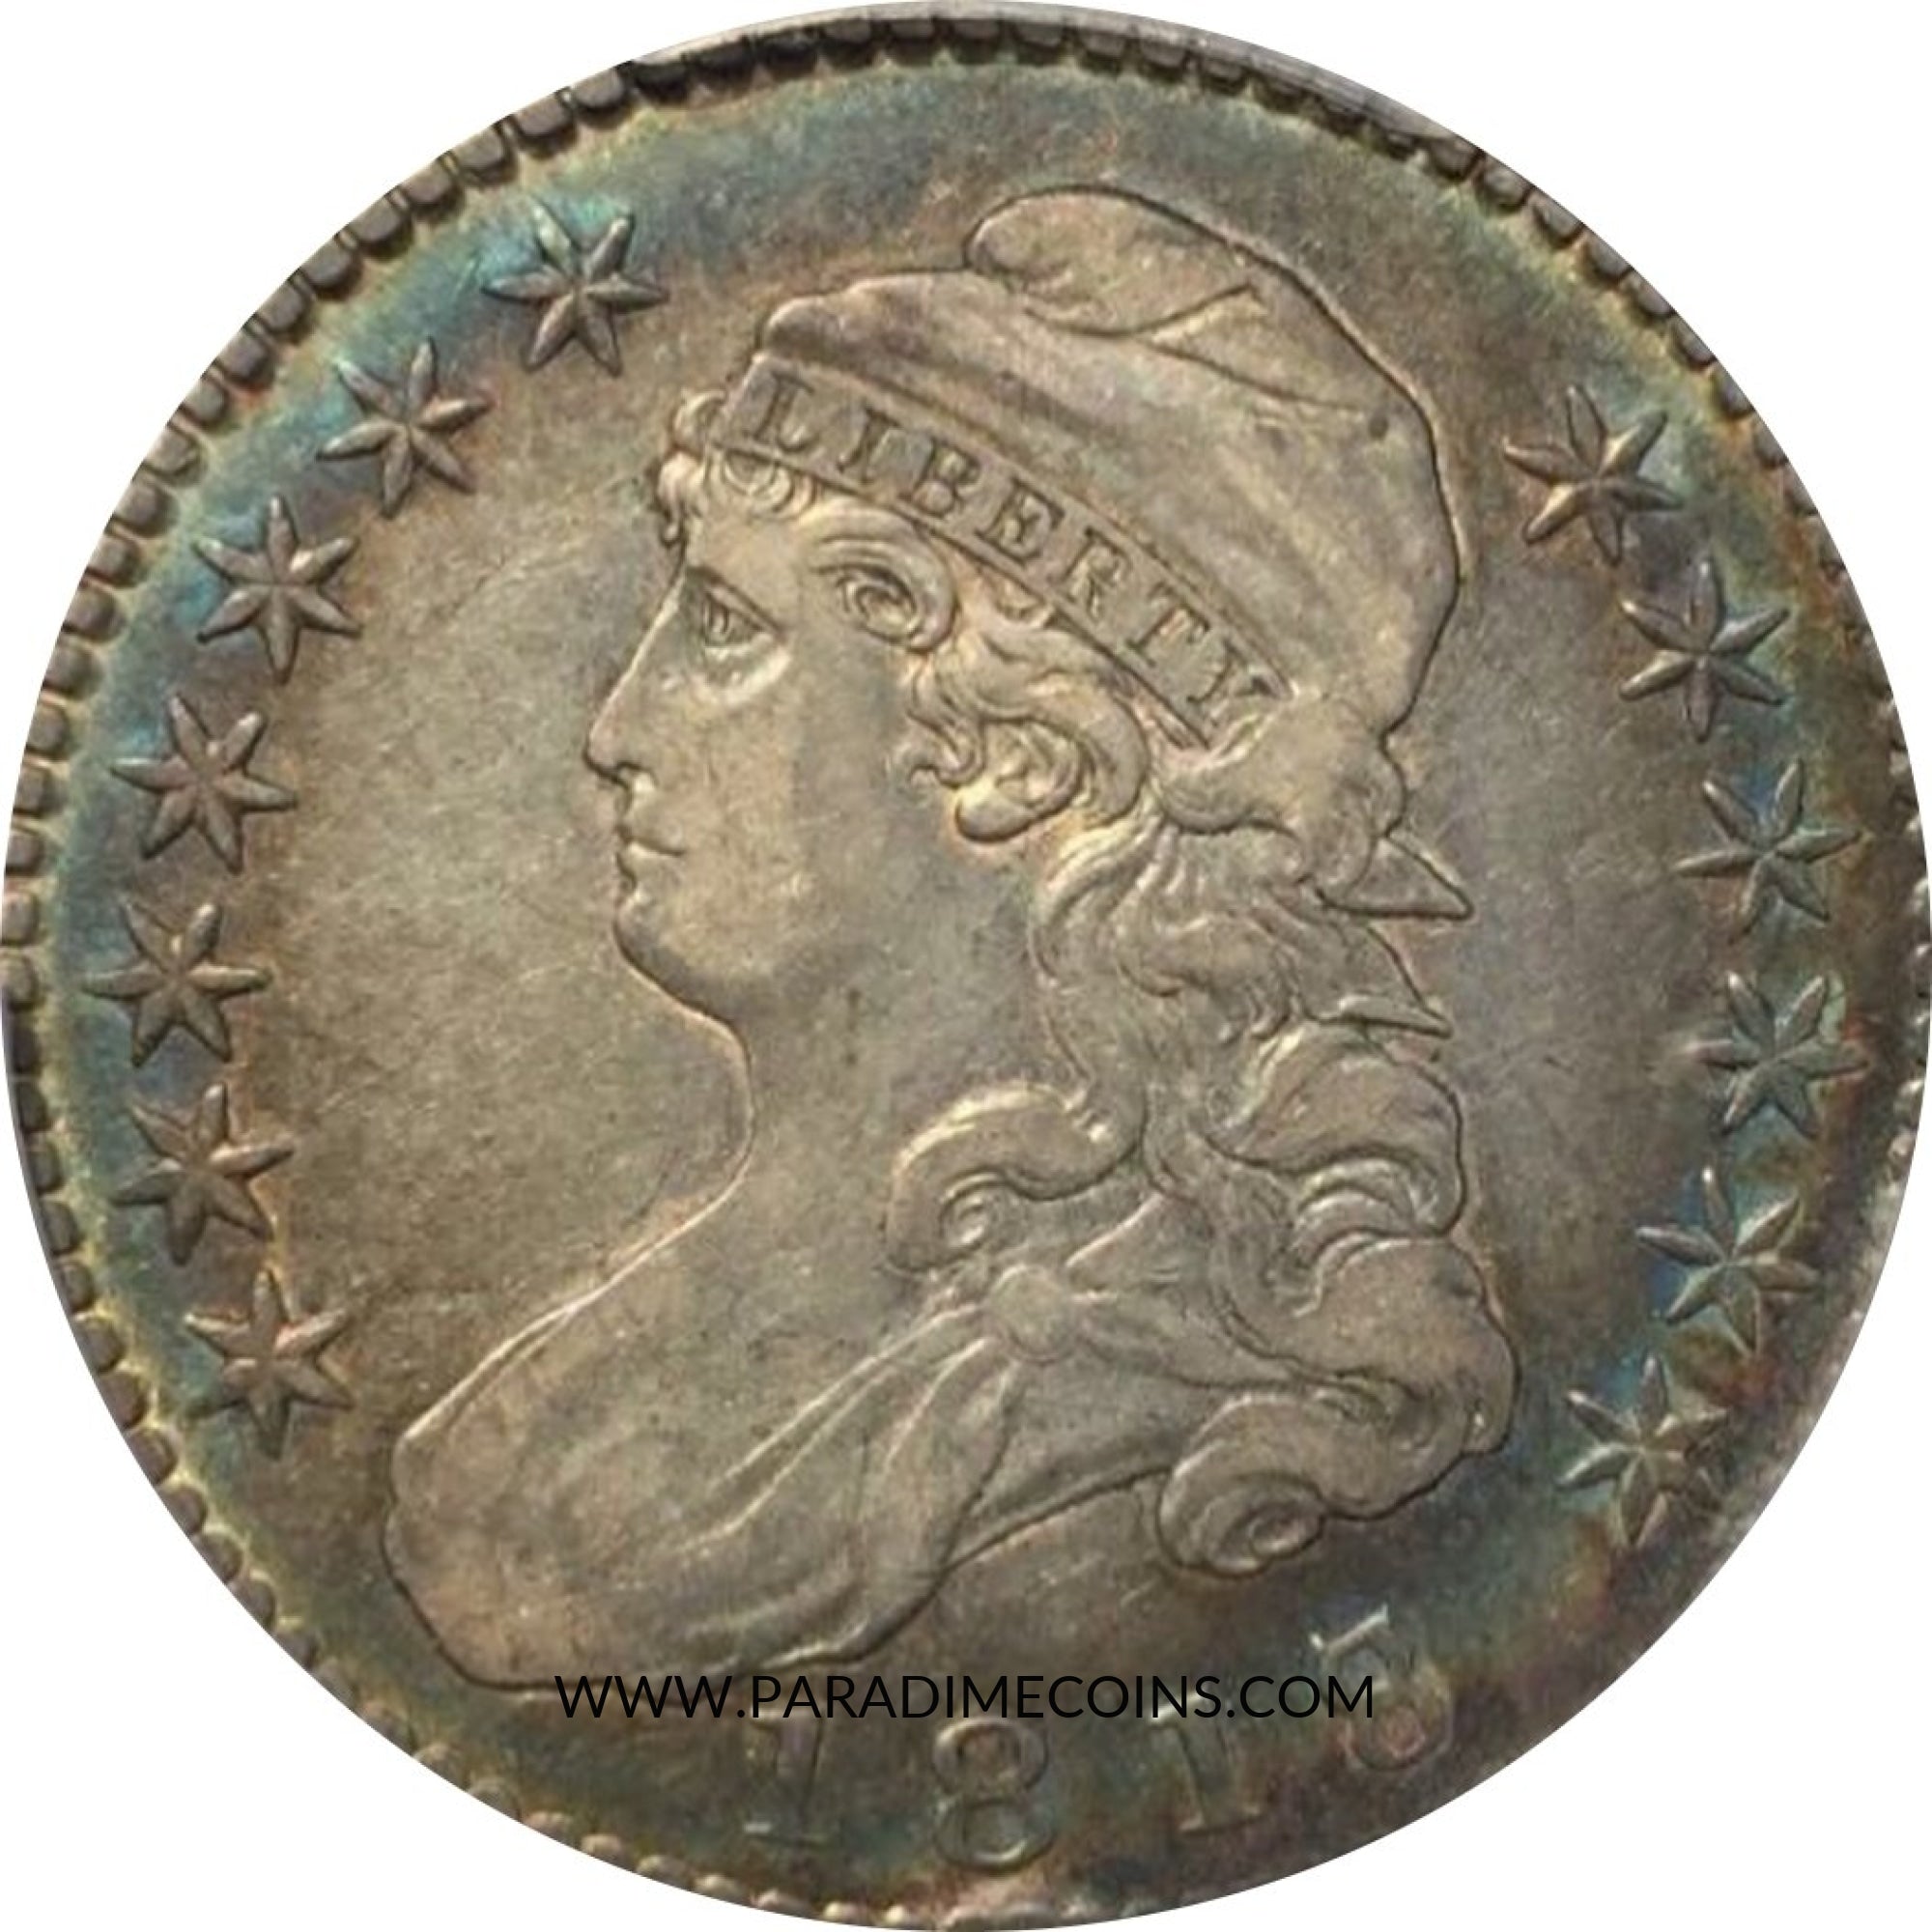 1818/7 50C VF35 PCGS LARGE 8 - Paradime Coins | PCGS NGC CACG CAC Rare US Numismatic Coins For Sale